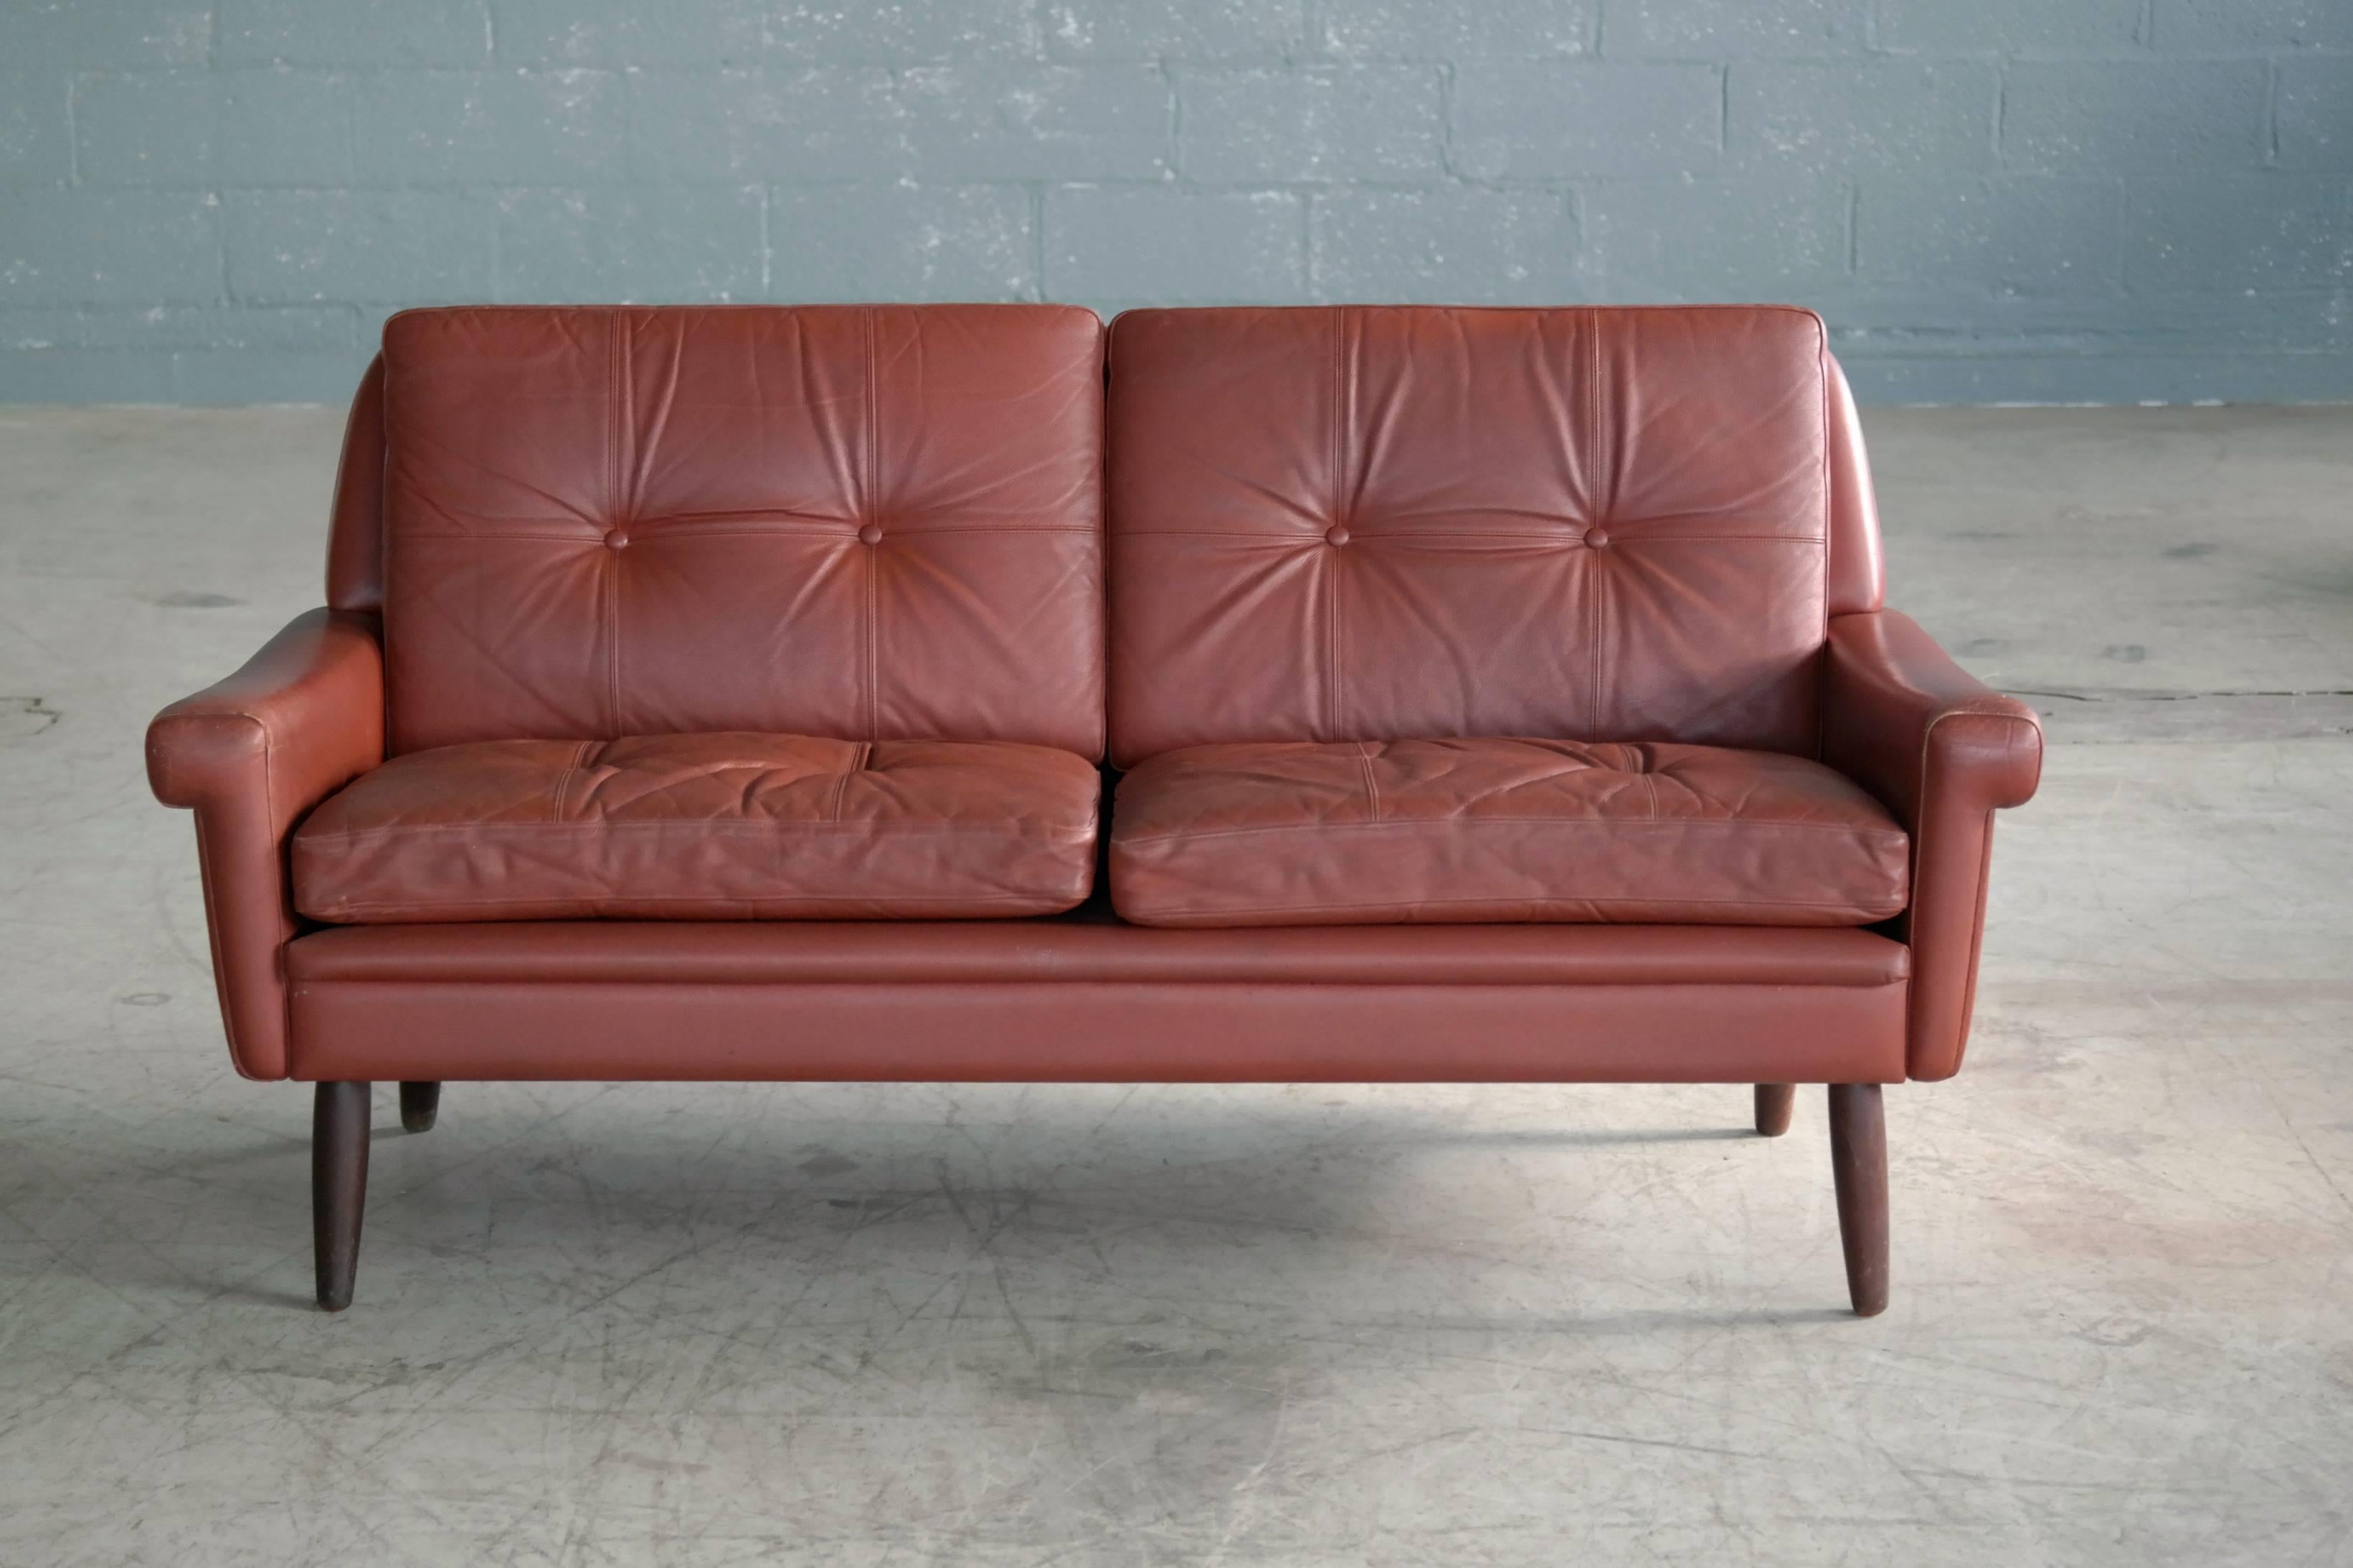 Wonderful loveseat or two-seat sofa designed by Sven Skipper in the 1960s. With loose cushions upholstered in buttoned reddish brown colored leather raised on stained beech legs. Overall very good condition with some natural age wear and patina